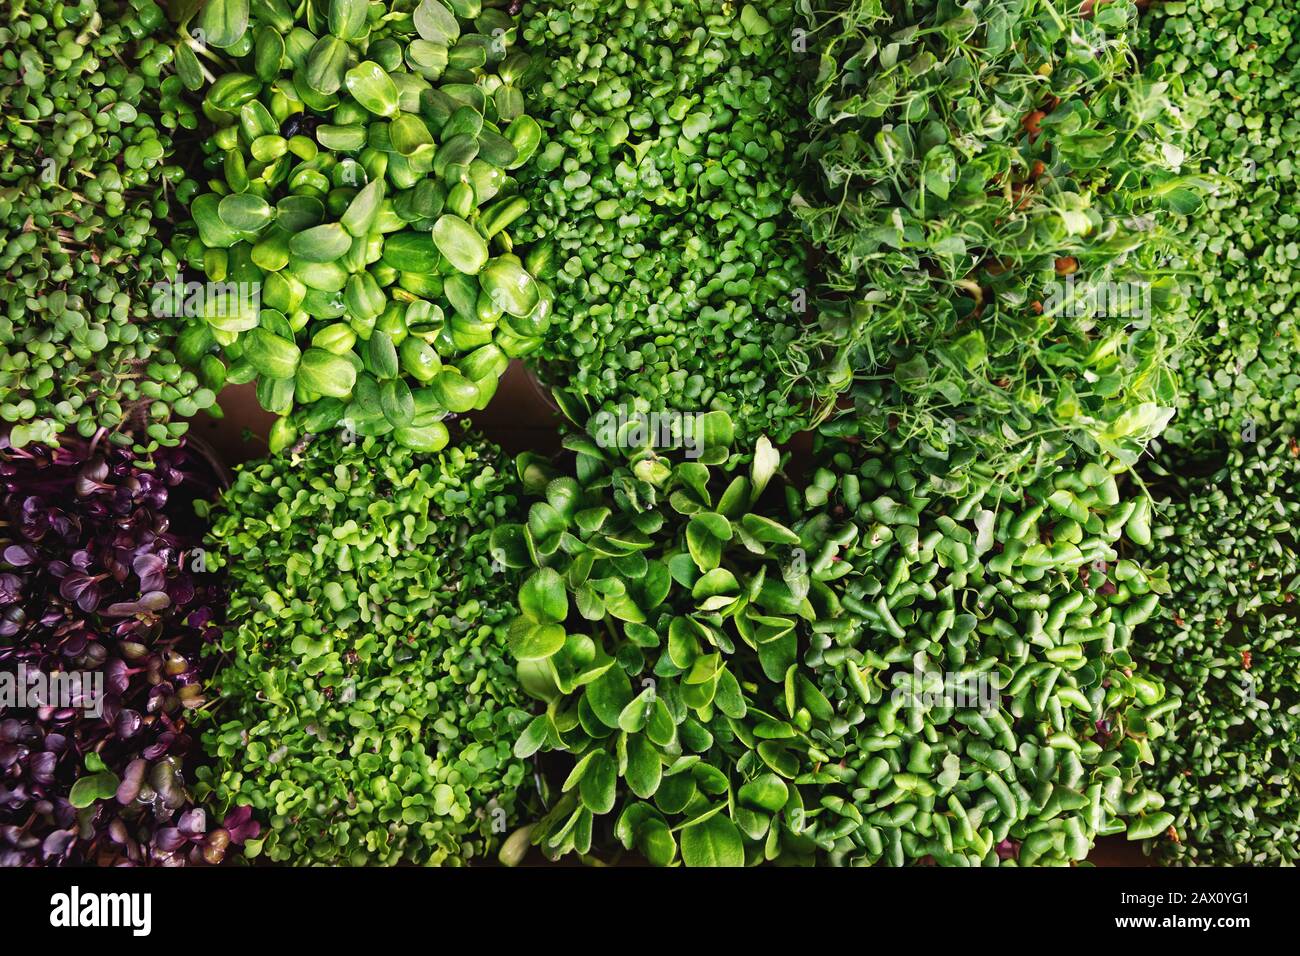 mix of fresh microgreens containers. top view Stock Photo